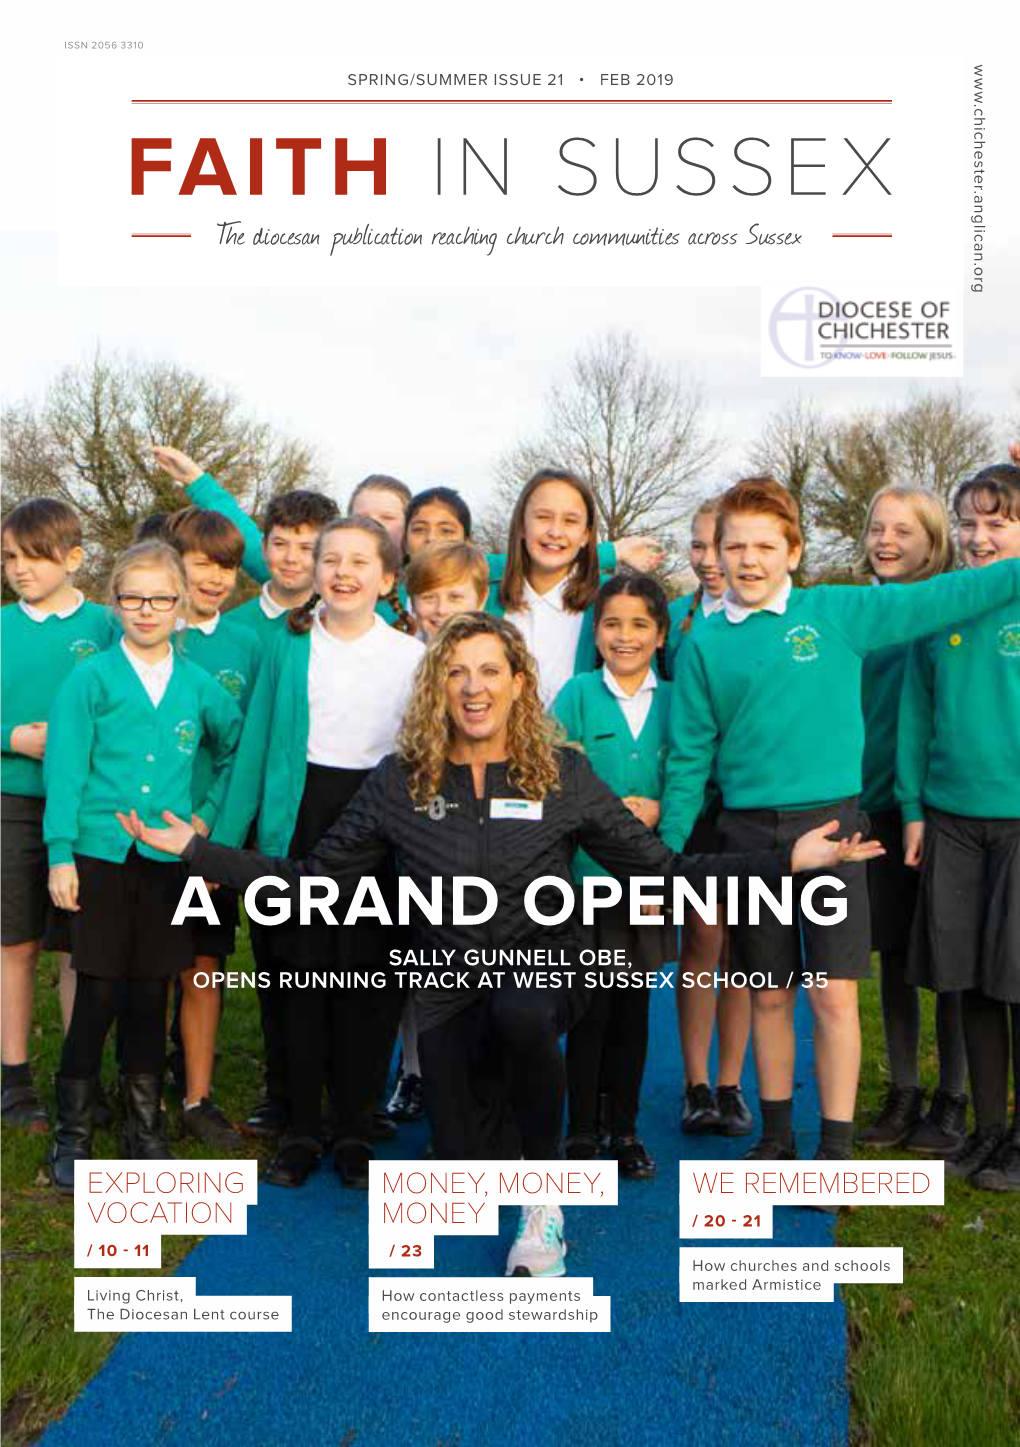 A GRAND OPENING a GRAND / 10 - 11 Christ, Living Course Lent Diocesan the EXPLORING EXPLORING VOCATION ISSN 2056 3310 ISSUE 19 3